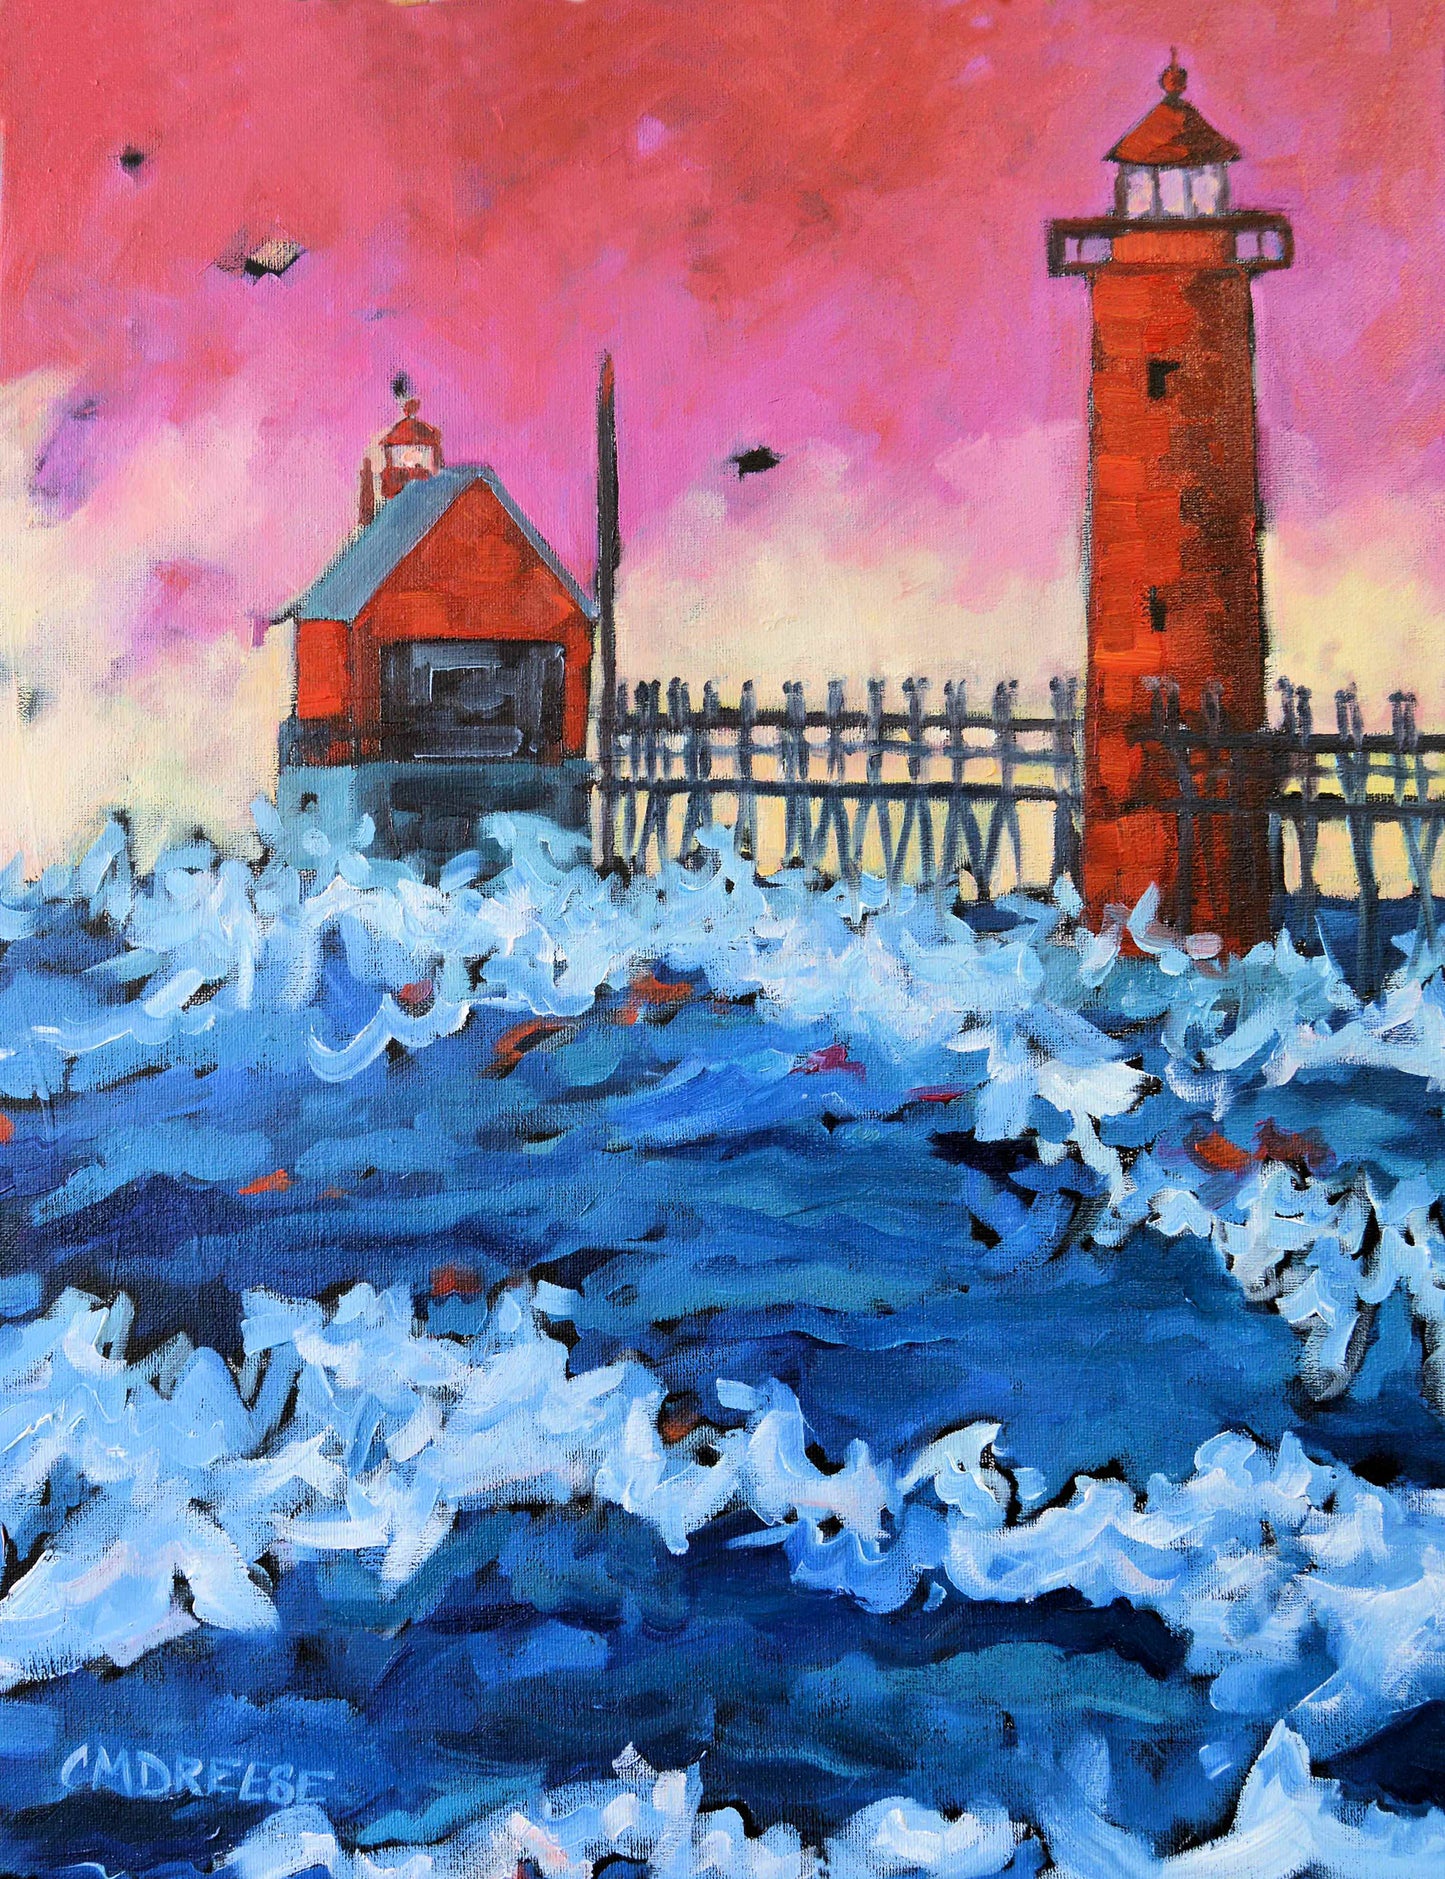 Pink Sky at Night Lighthouse Print on Paper, Wood Panel